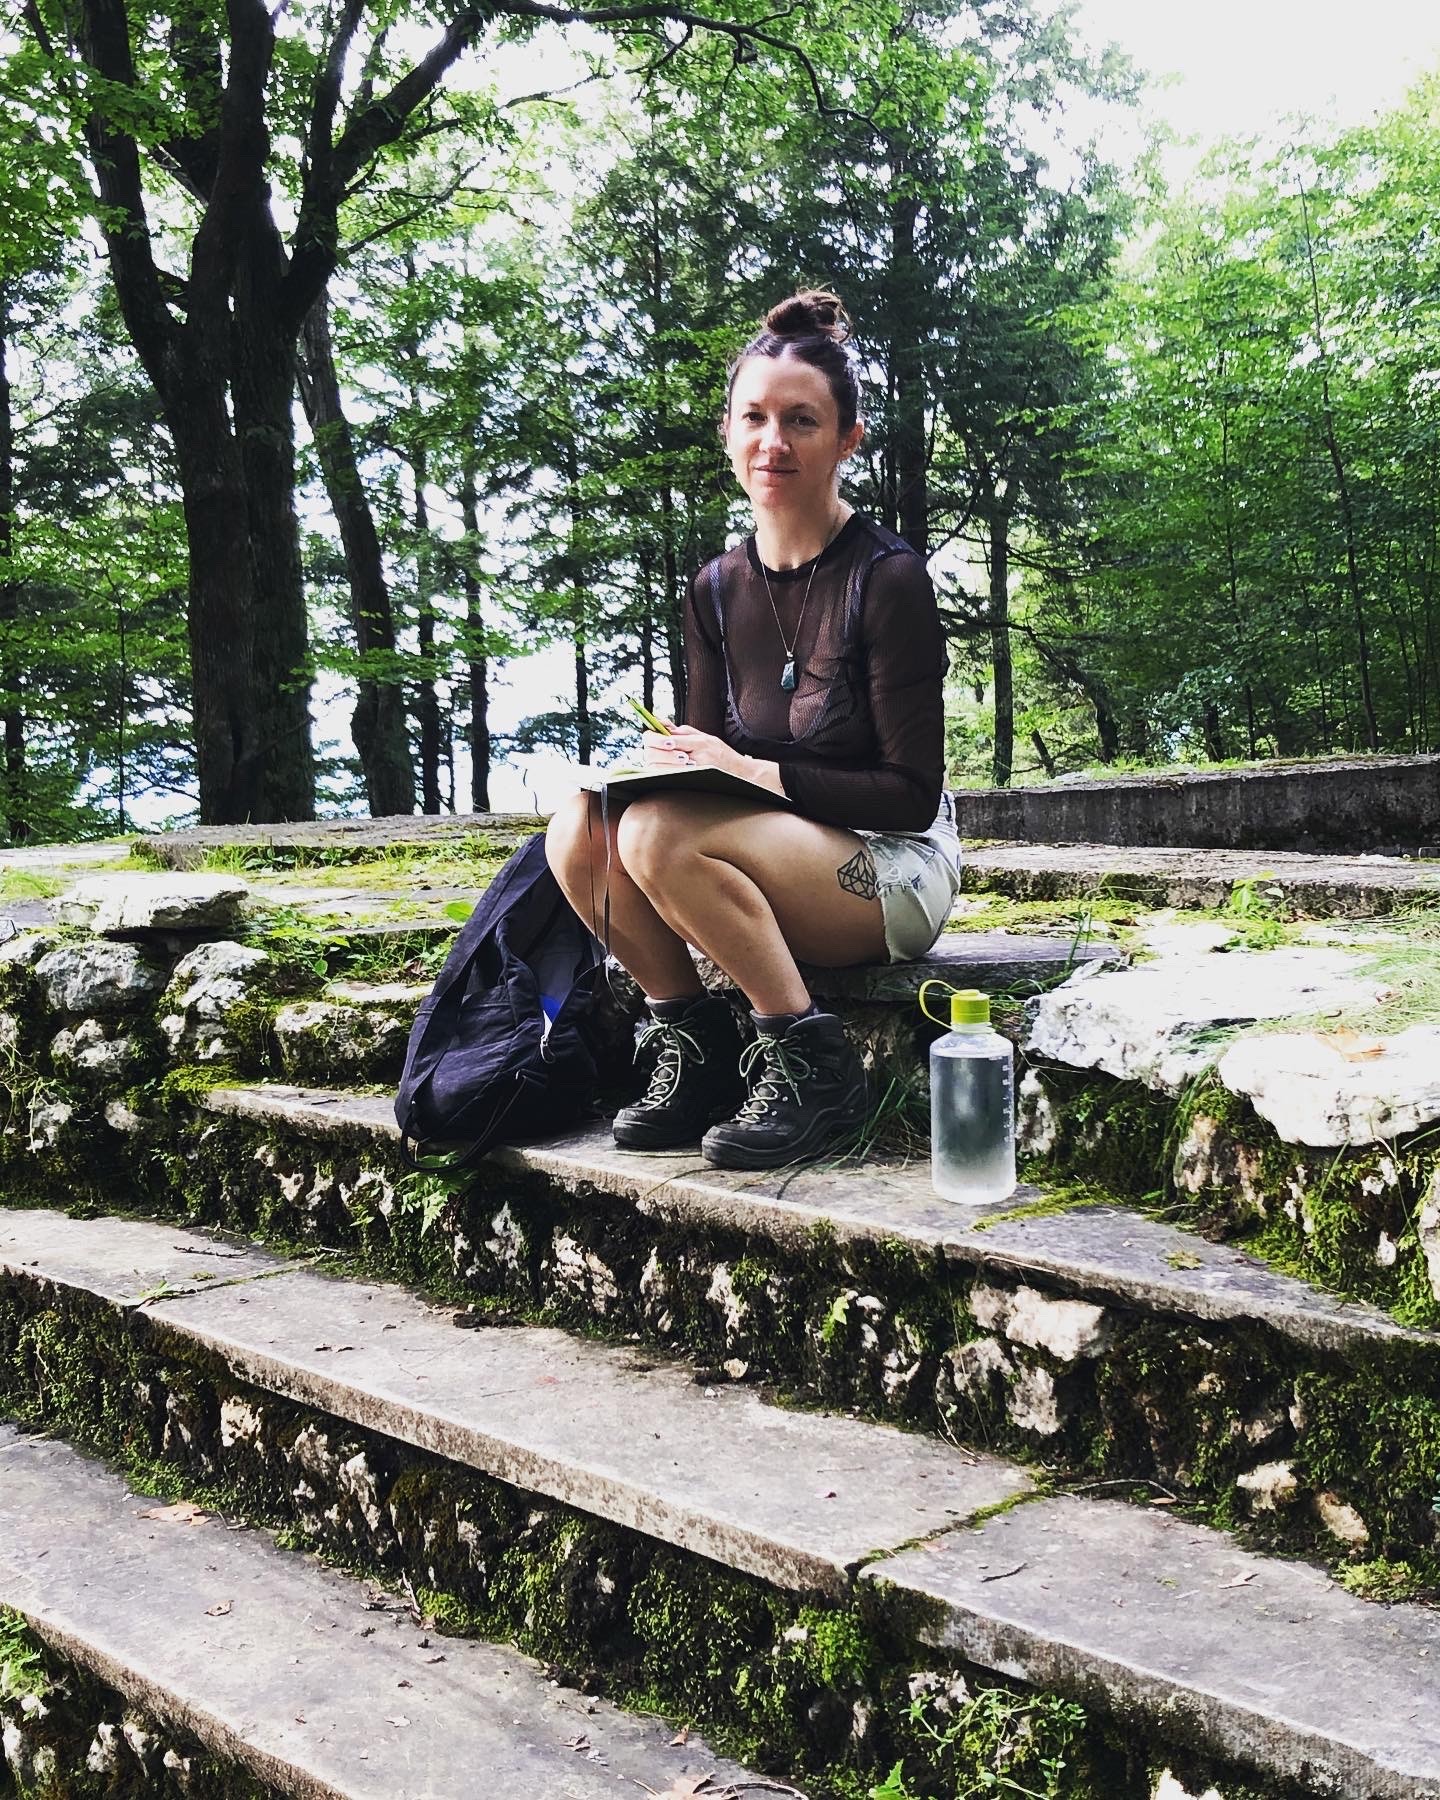 Sara Jane Stoner is featured centered in a portrait-formatted photograph, seated on stone stairs in a park. Her knees are up and placed on them are a book. To her left is a water bottle, to her right a backpack. She is wearing a denim skirt, a black shirt, and smiling at the camera. Behind are trees.